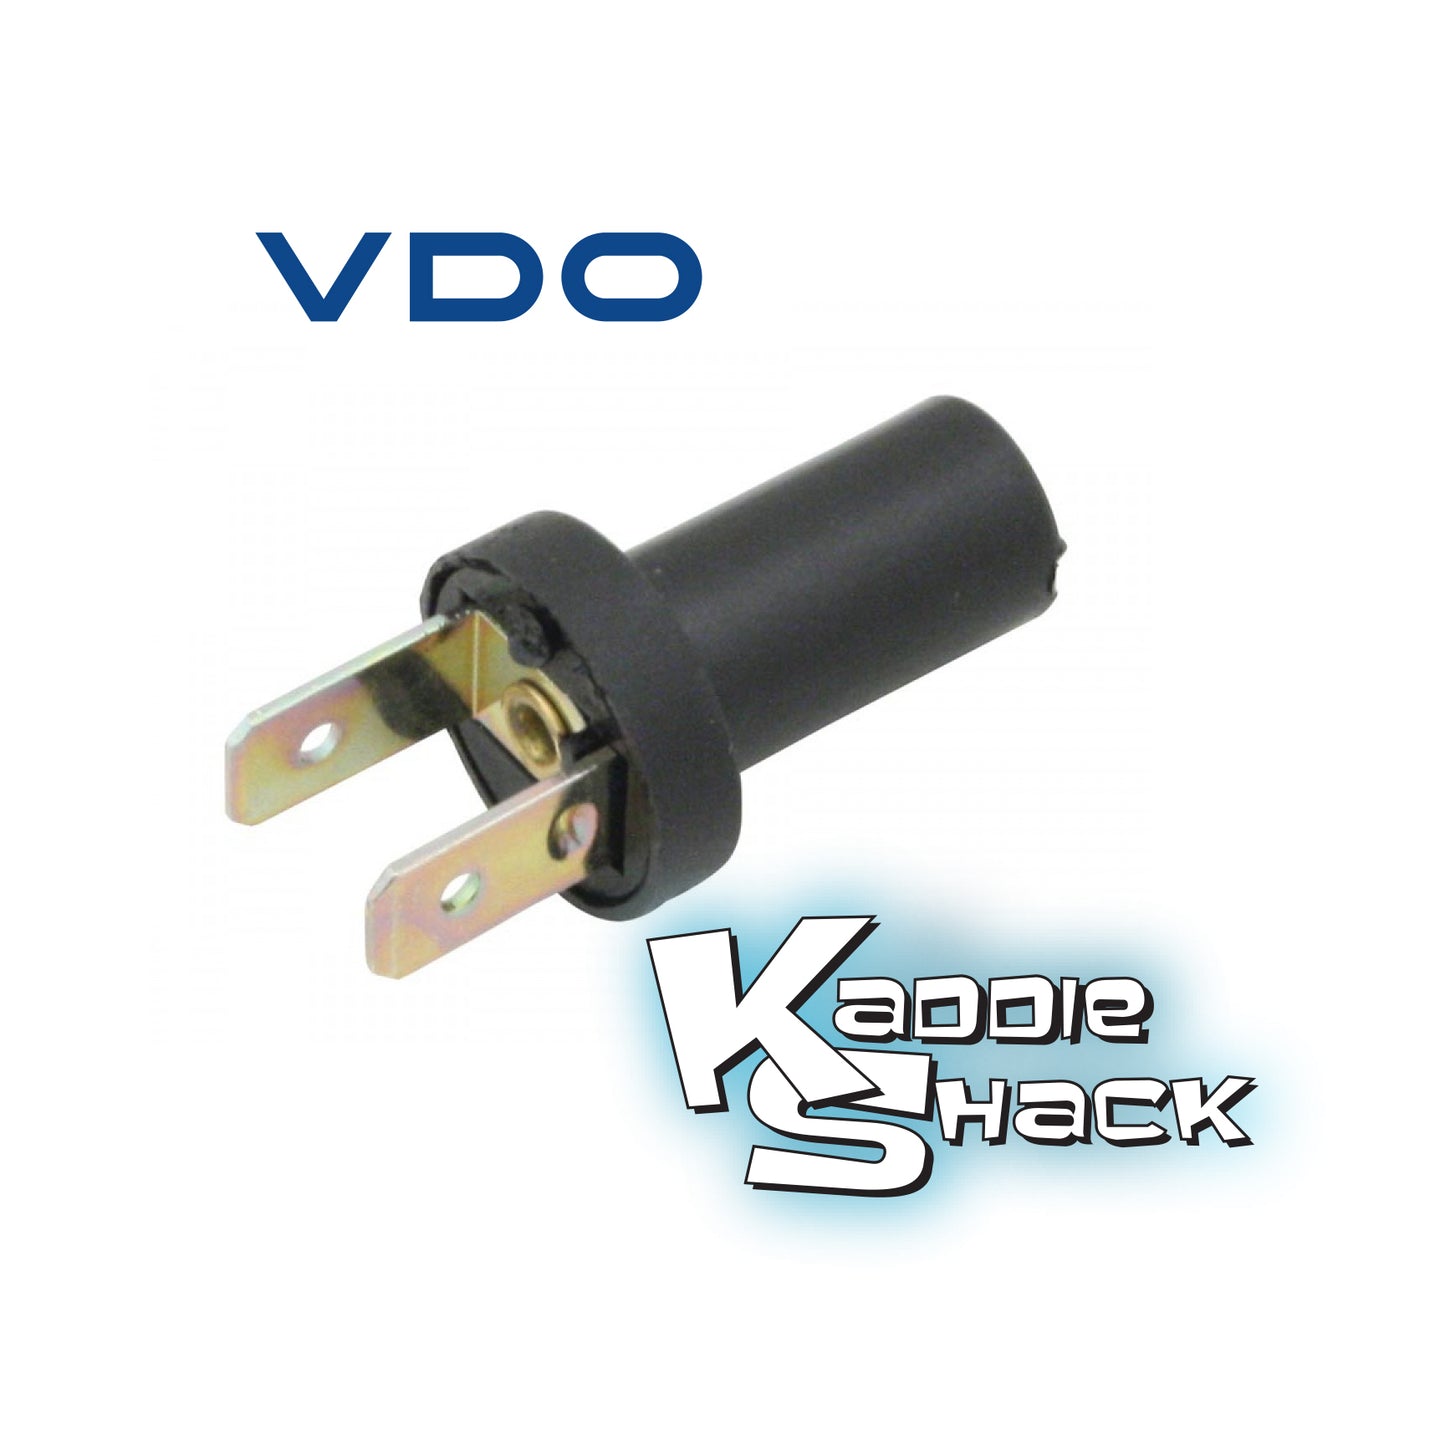 VDO Replacement Dash Bulb Holder for 11/32" Base Bulbs